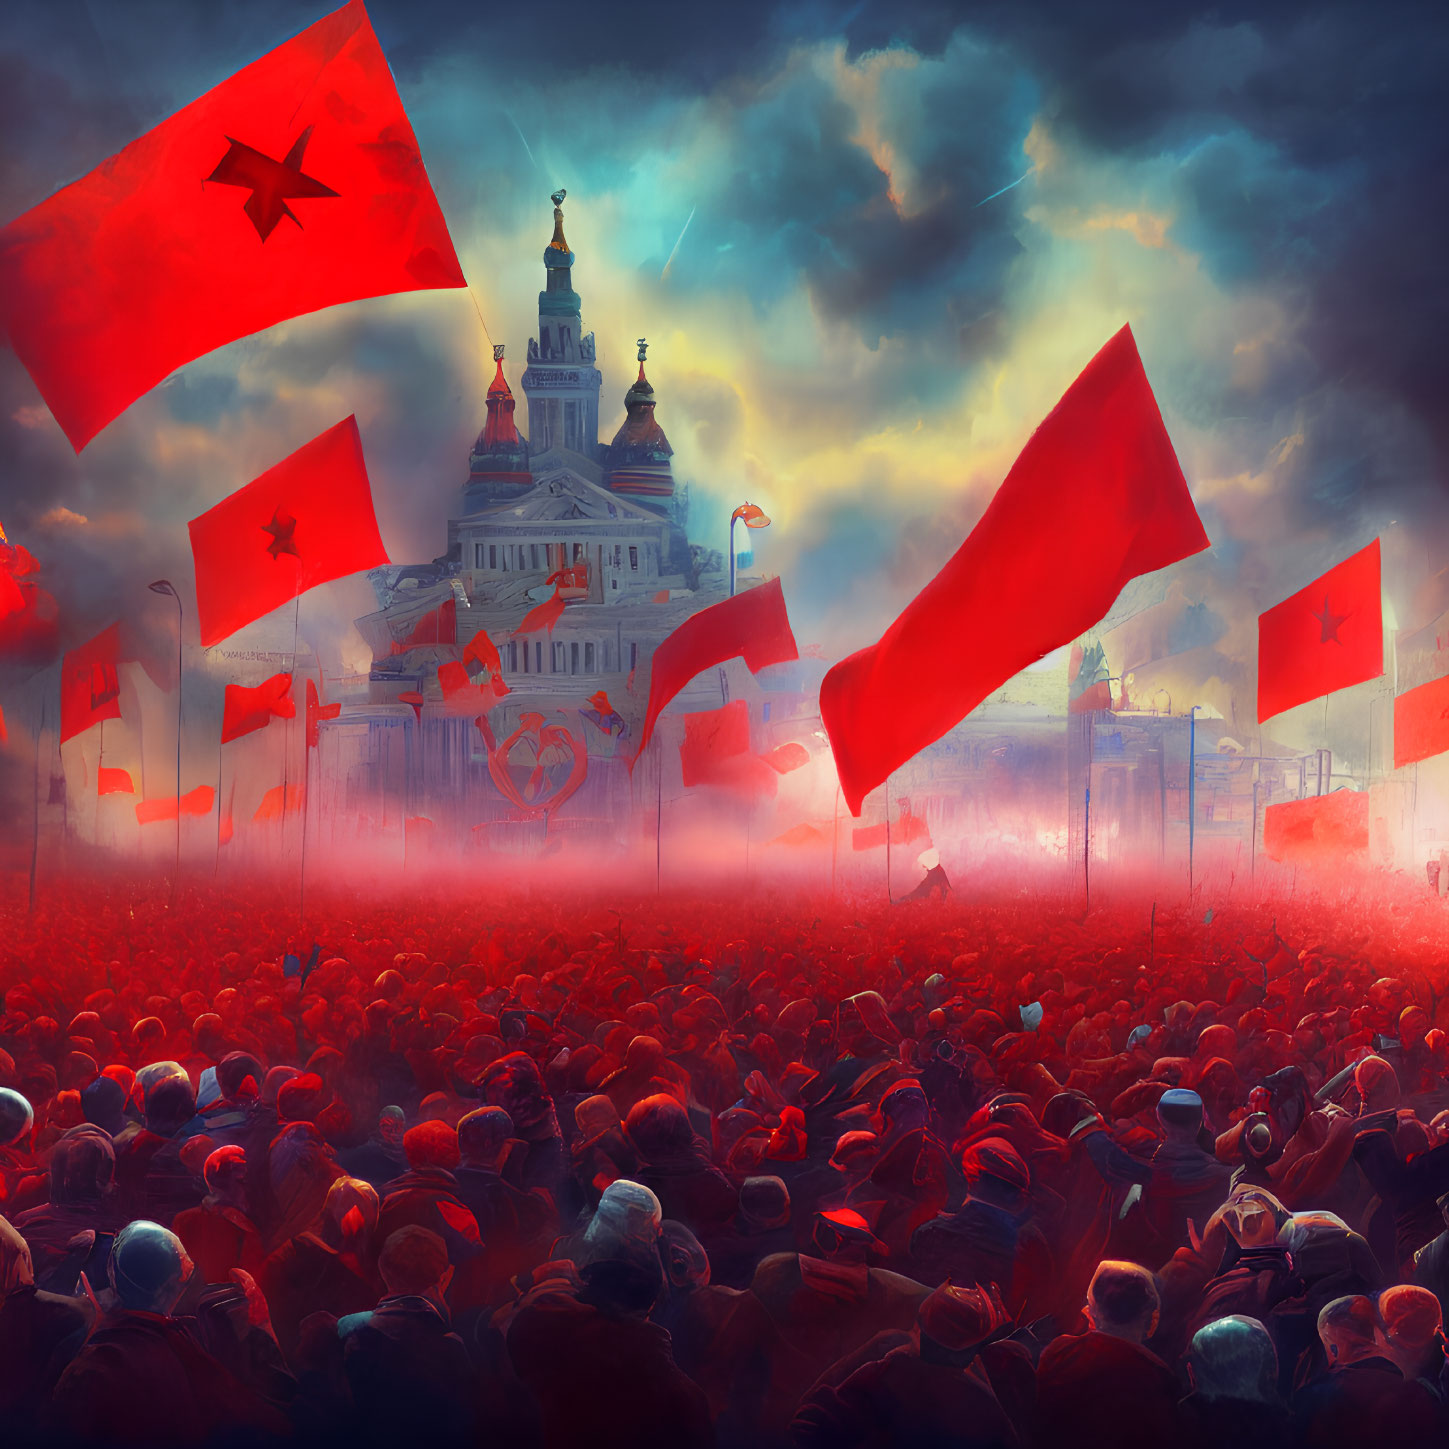 Illustration: Animated crowd with red flags converging on grand building